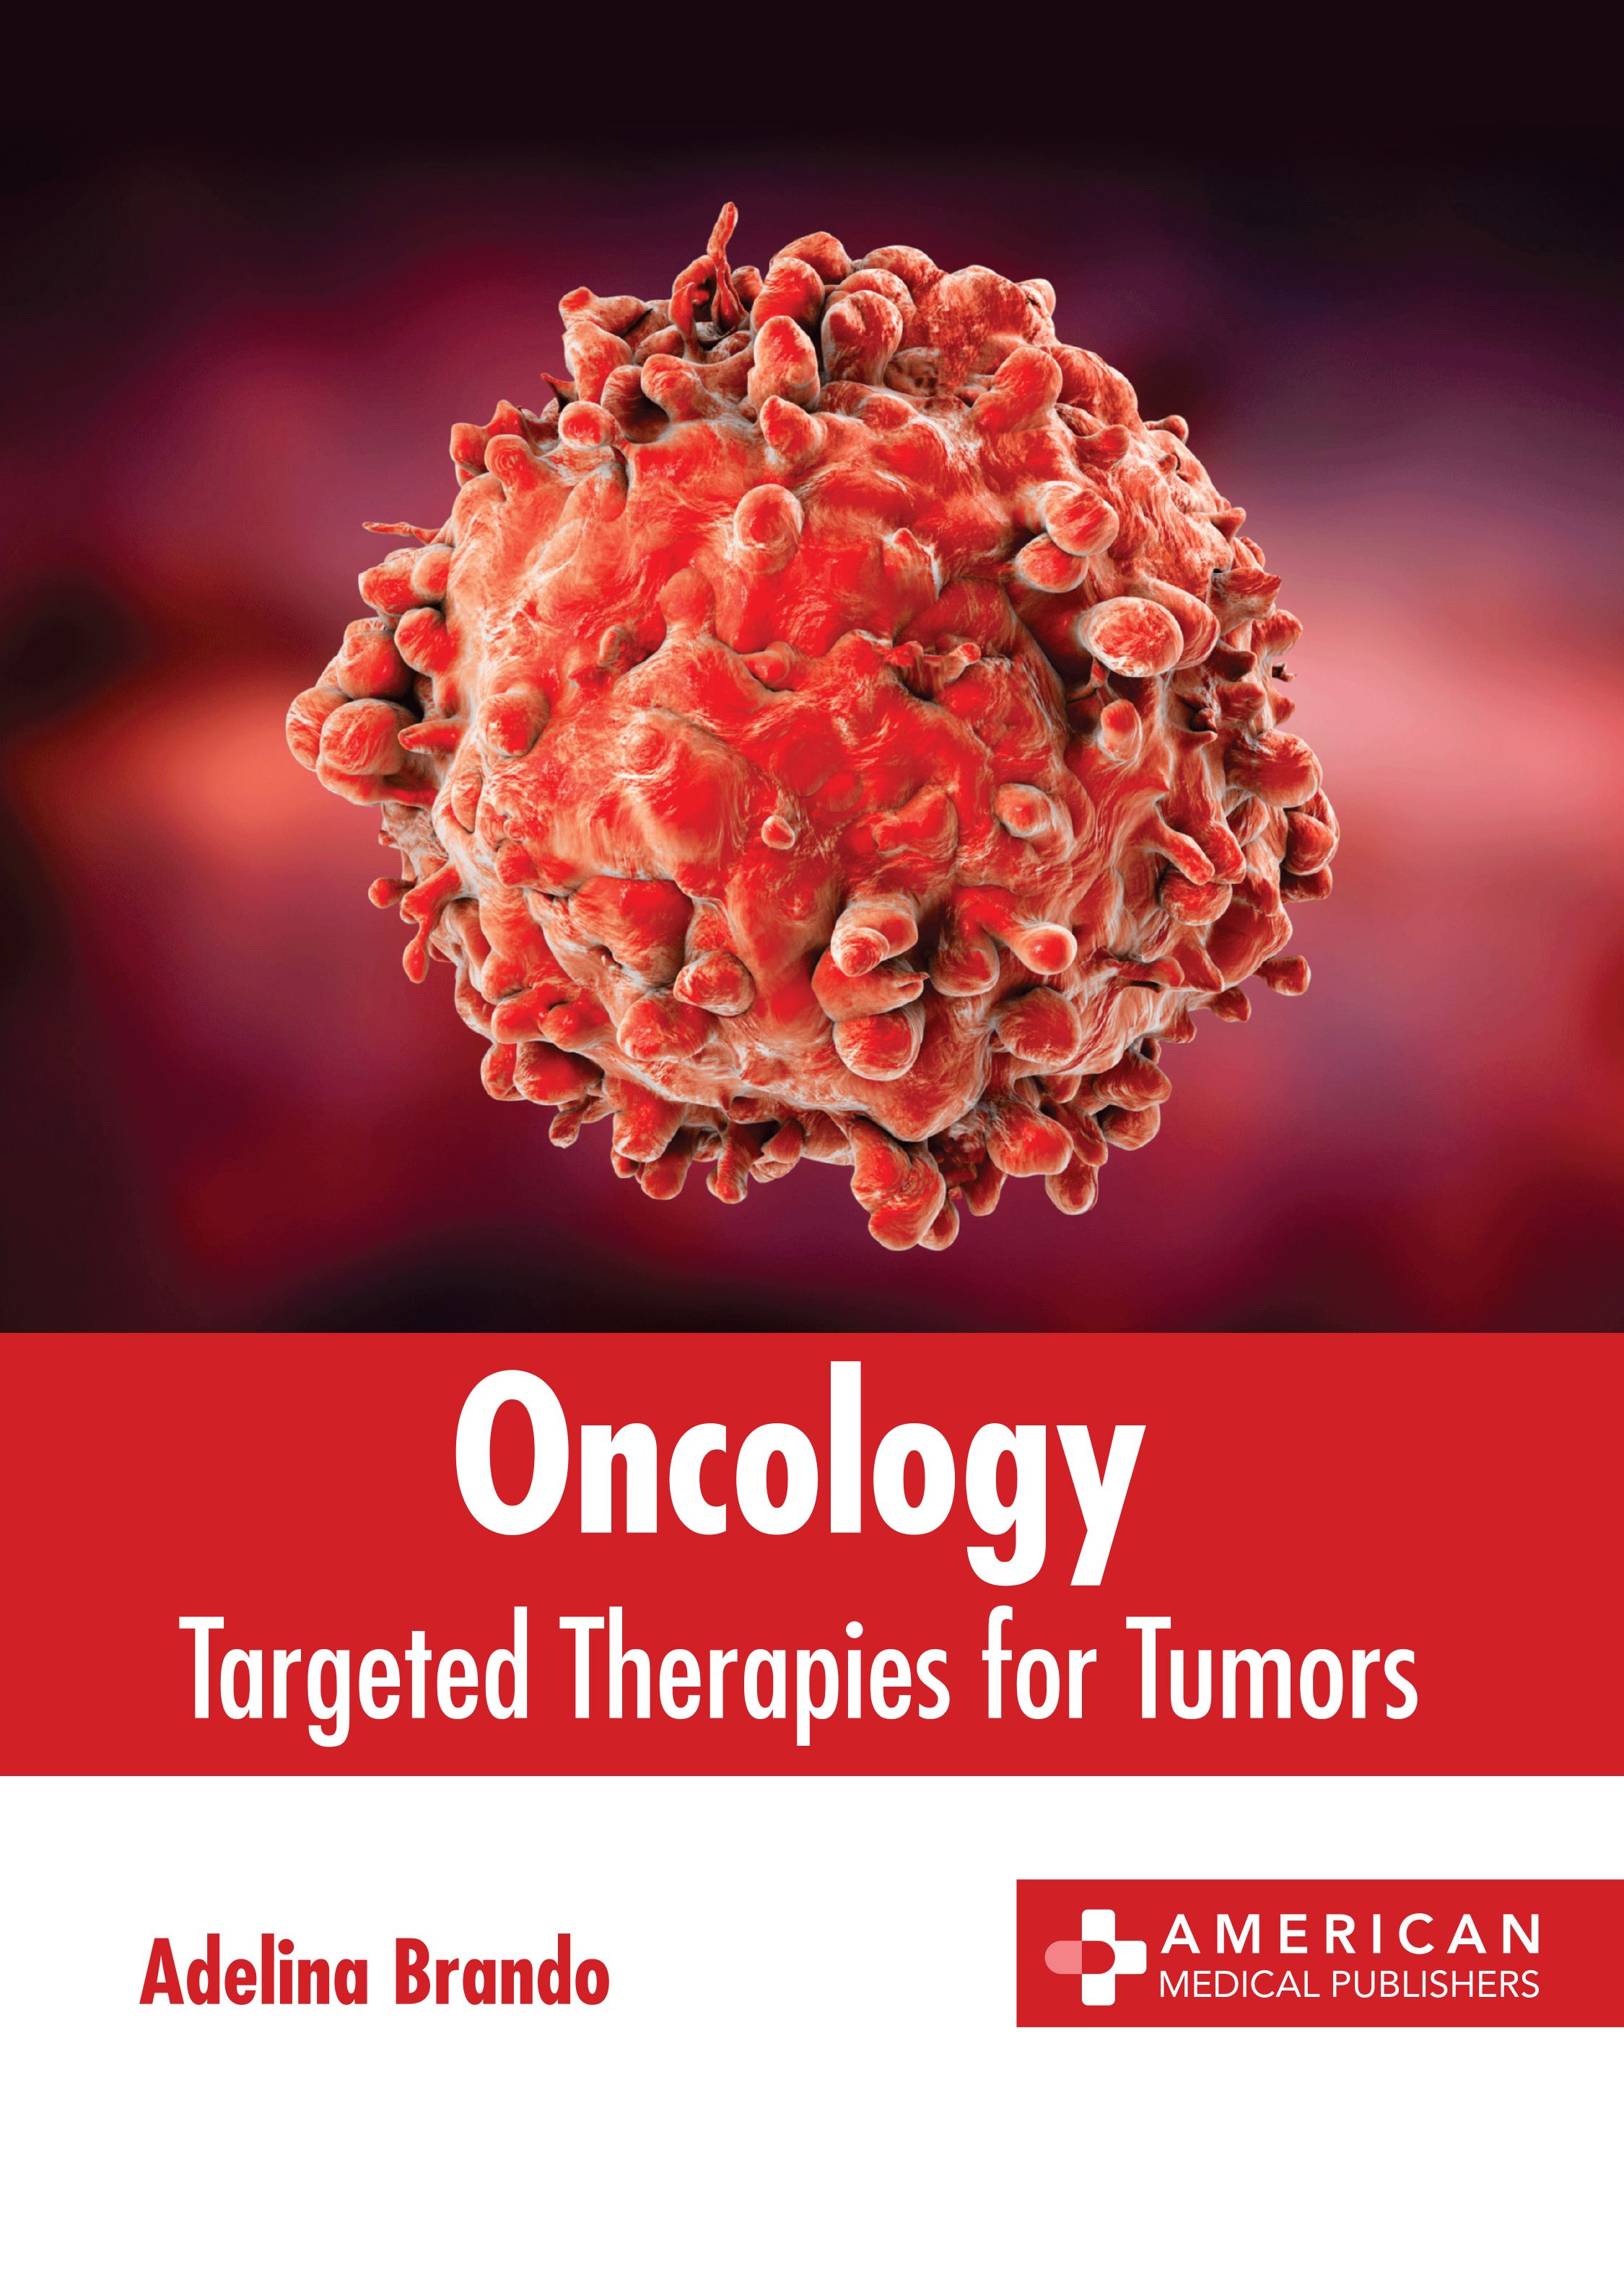 ONCOLOGY: TARGETED THERAPIES FOR TUMORS